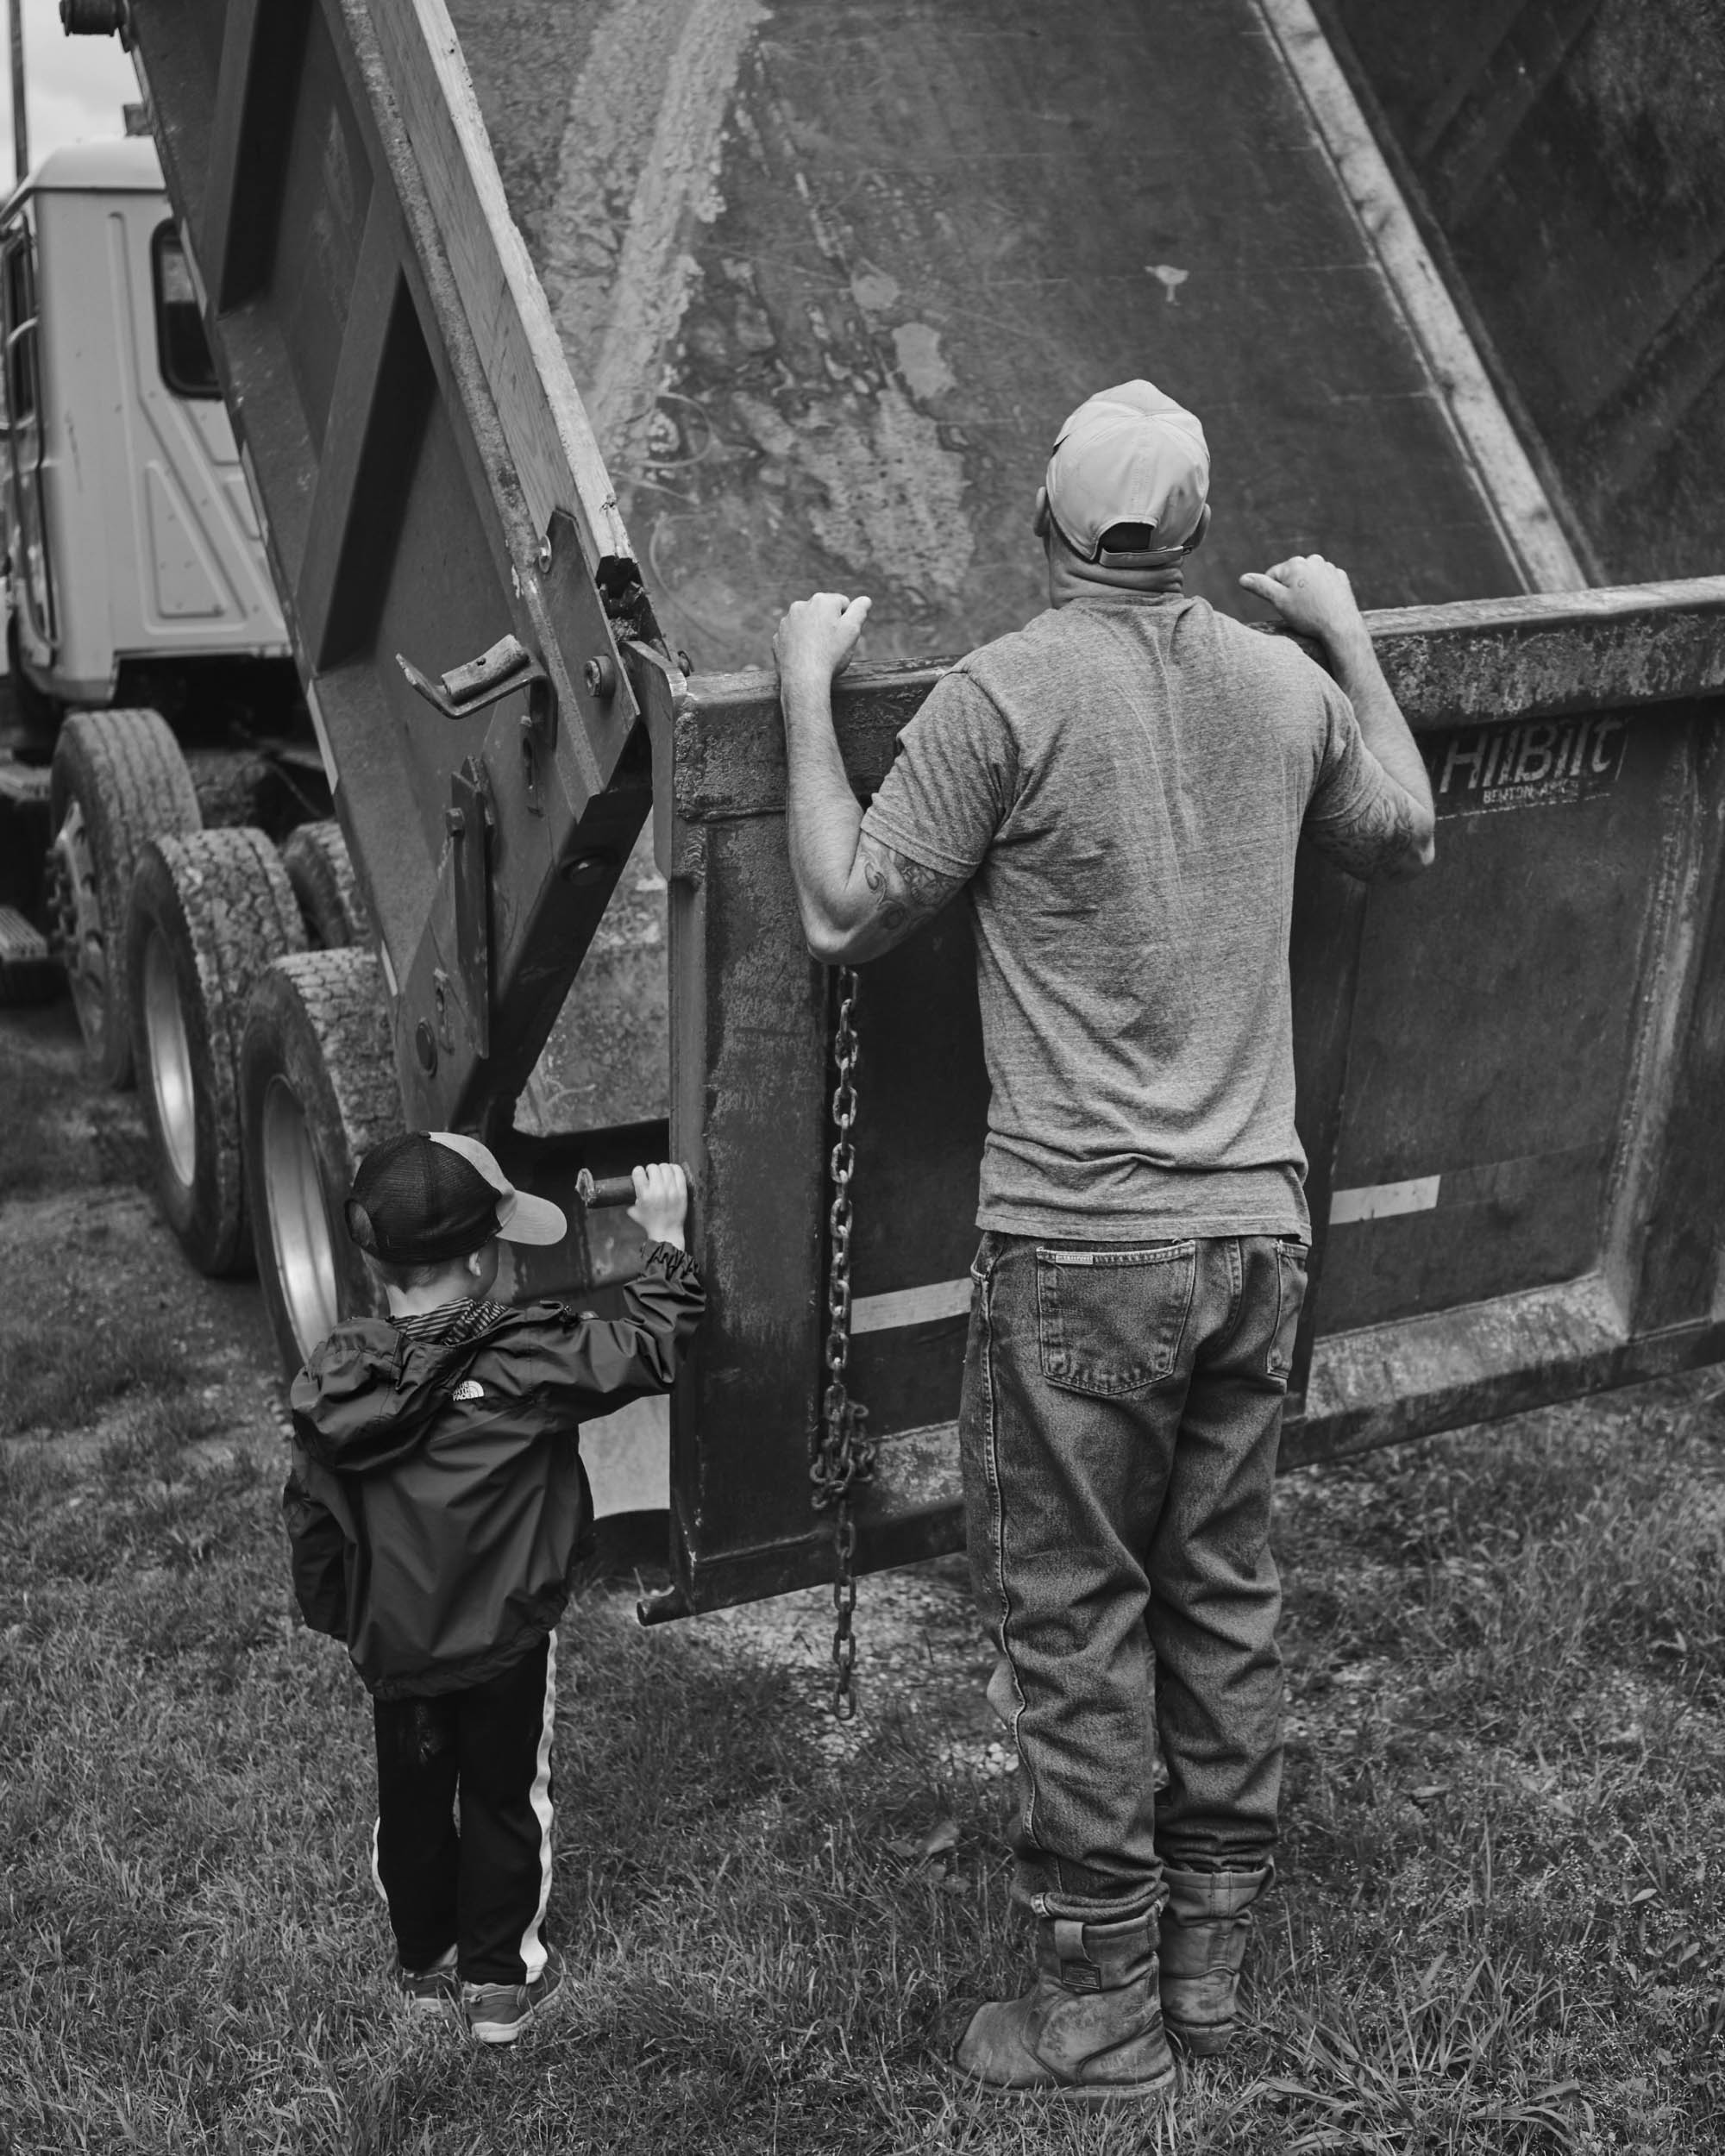 Greg and his son at home. Photo by Justin Hollar.